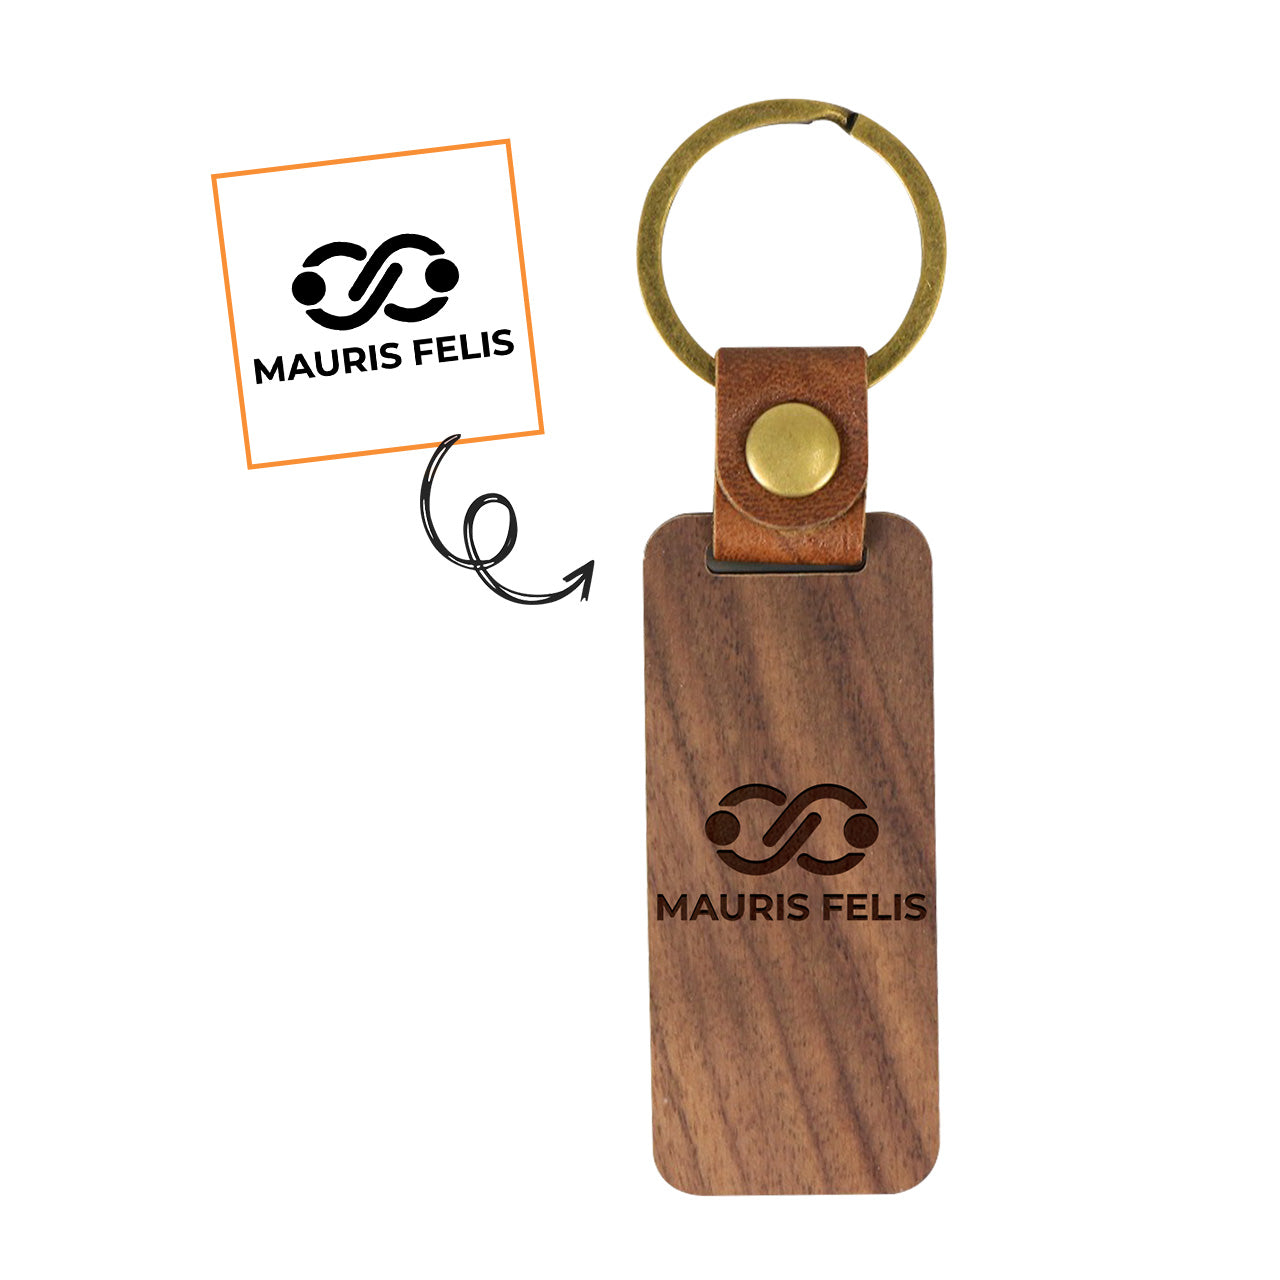 Ottocases Unique Custom Wooden Keychain | Customized Logo-Wooden Keychains Cherry / 100 / UV Color Print